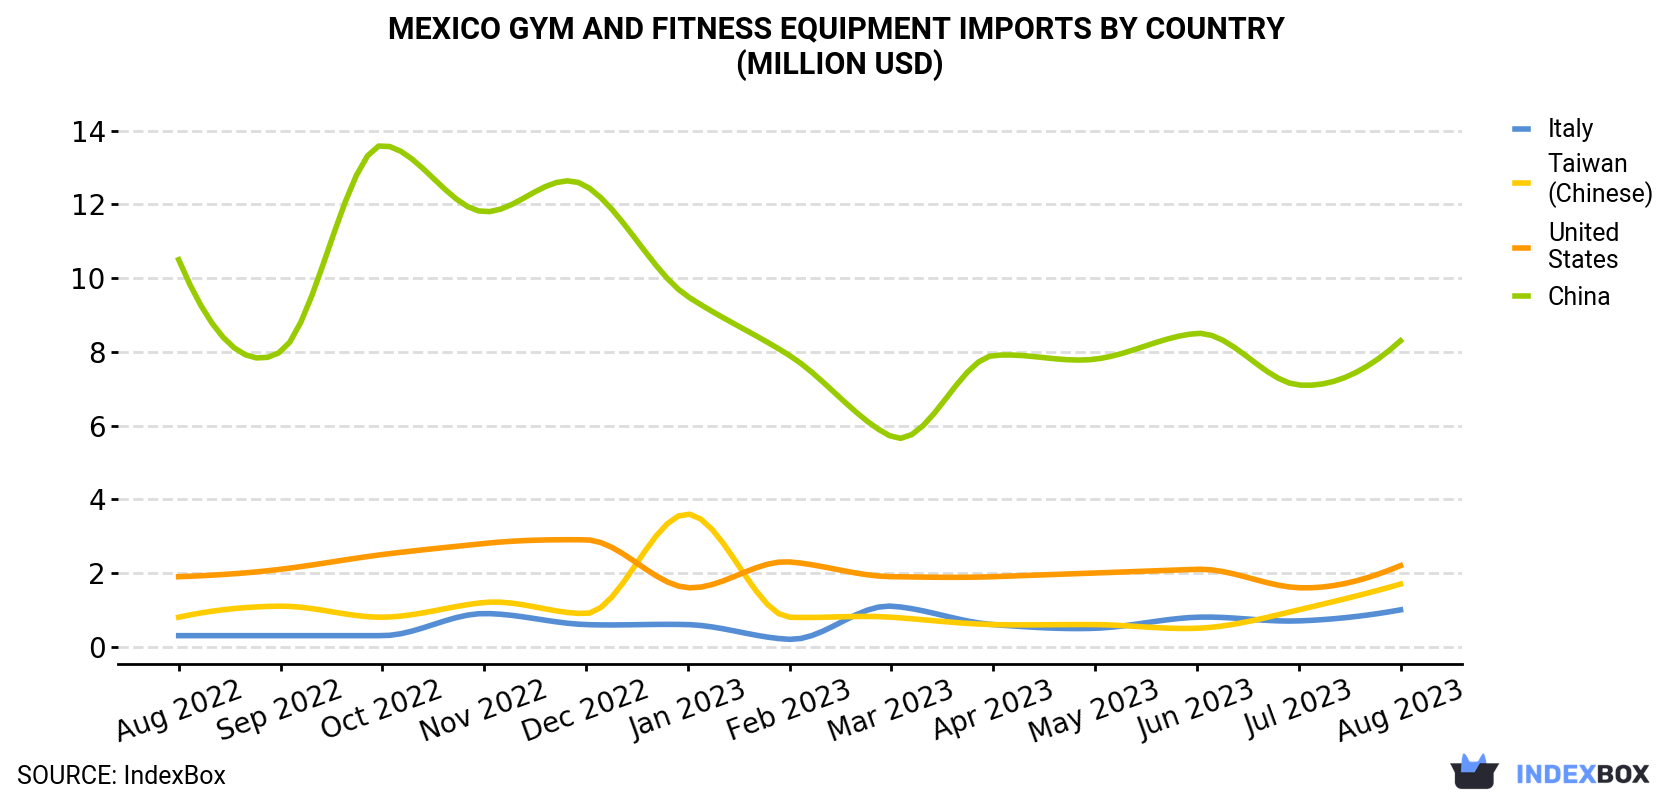 Mexico Gym and Fitness Equipment Imports By Country (Million USD)